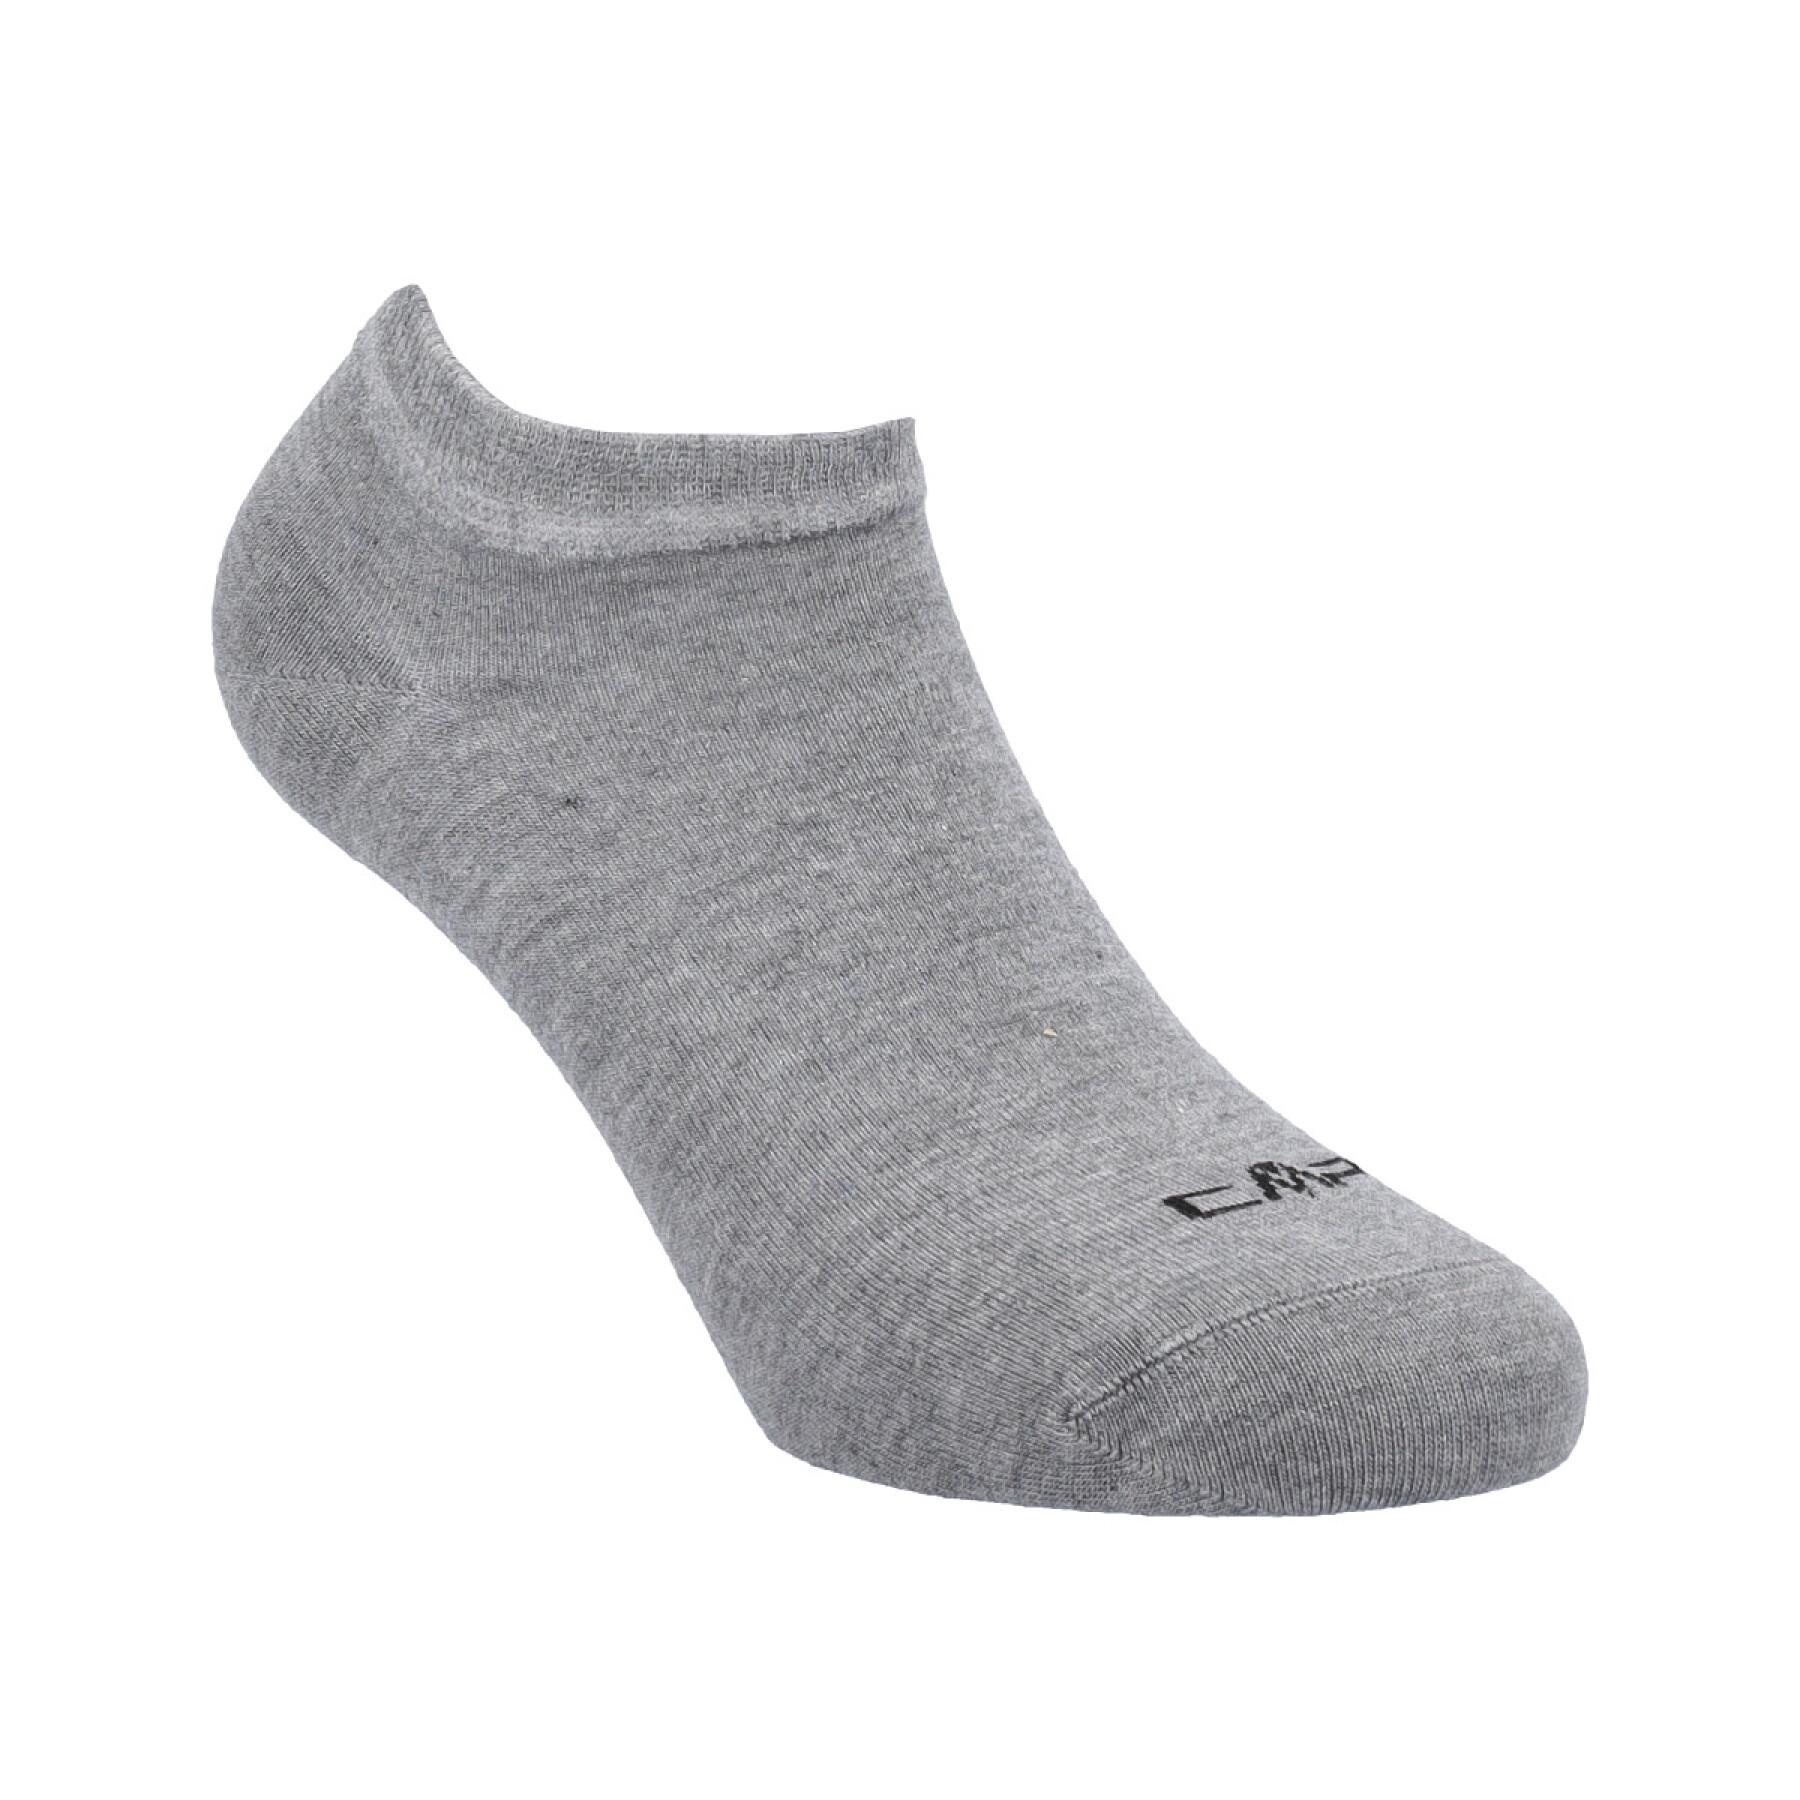 Set of 3 pairs of invisible socks for women CMP